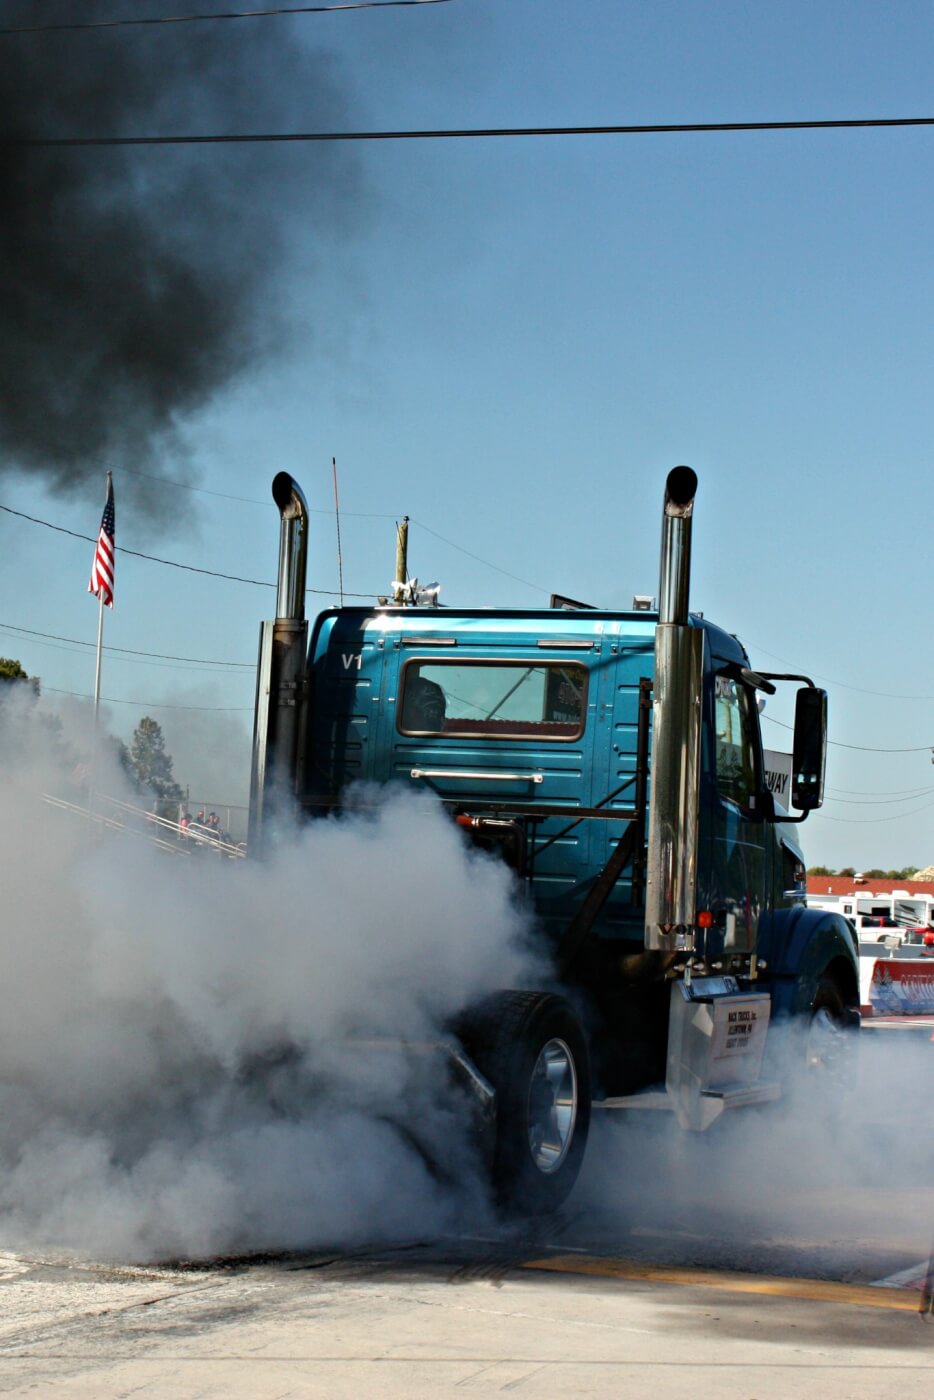 As a true diesel event, anything that ran on diesel was welcome to enter and compete and this short bobtail Volvo came ready to compete. The big power under the hood packed a punch and pushed this semi to low 13s, made for some awesome burnouts too.